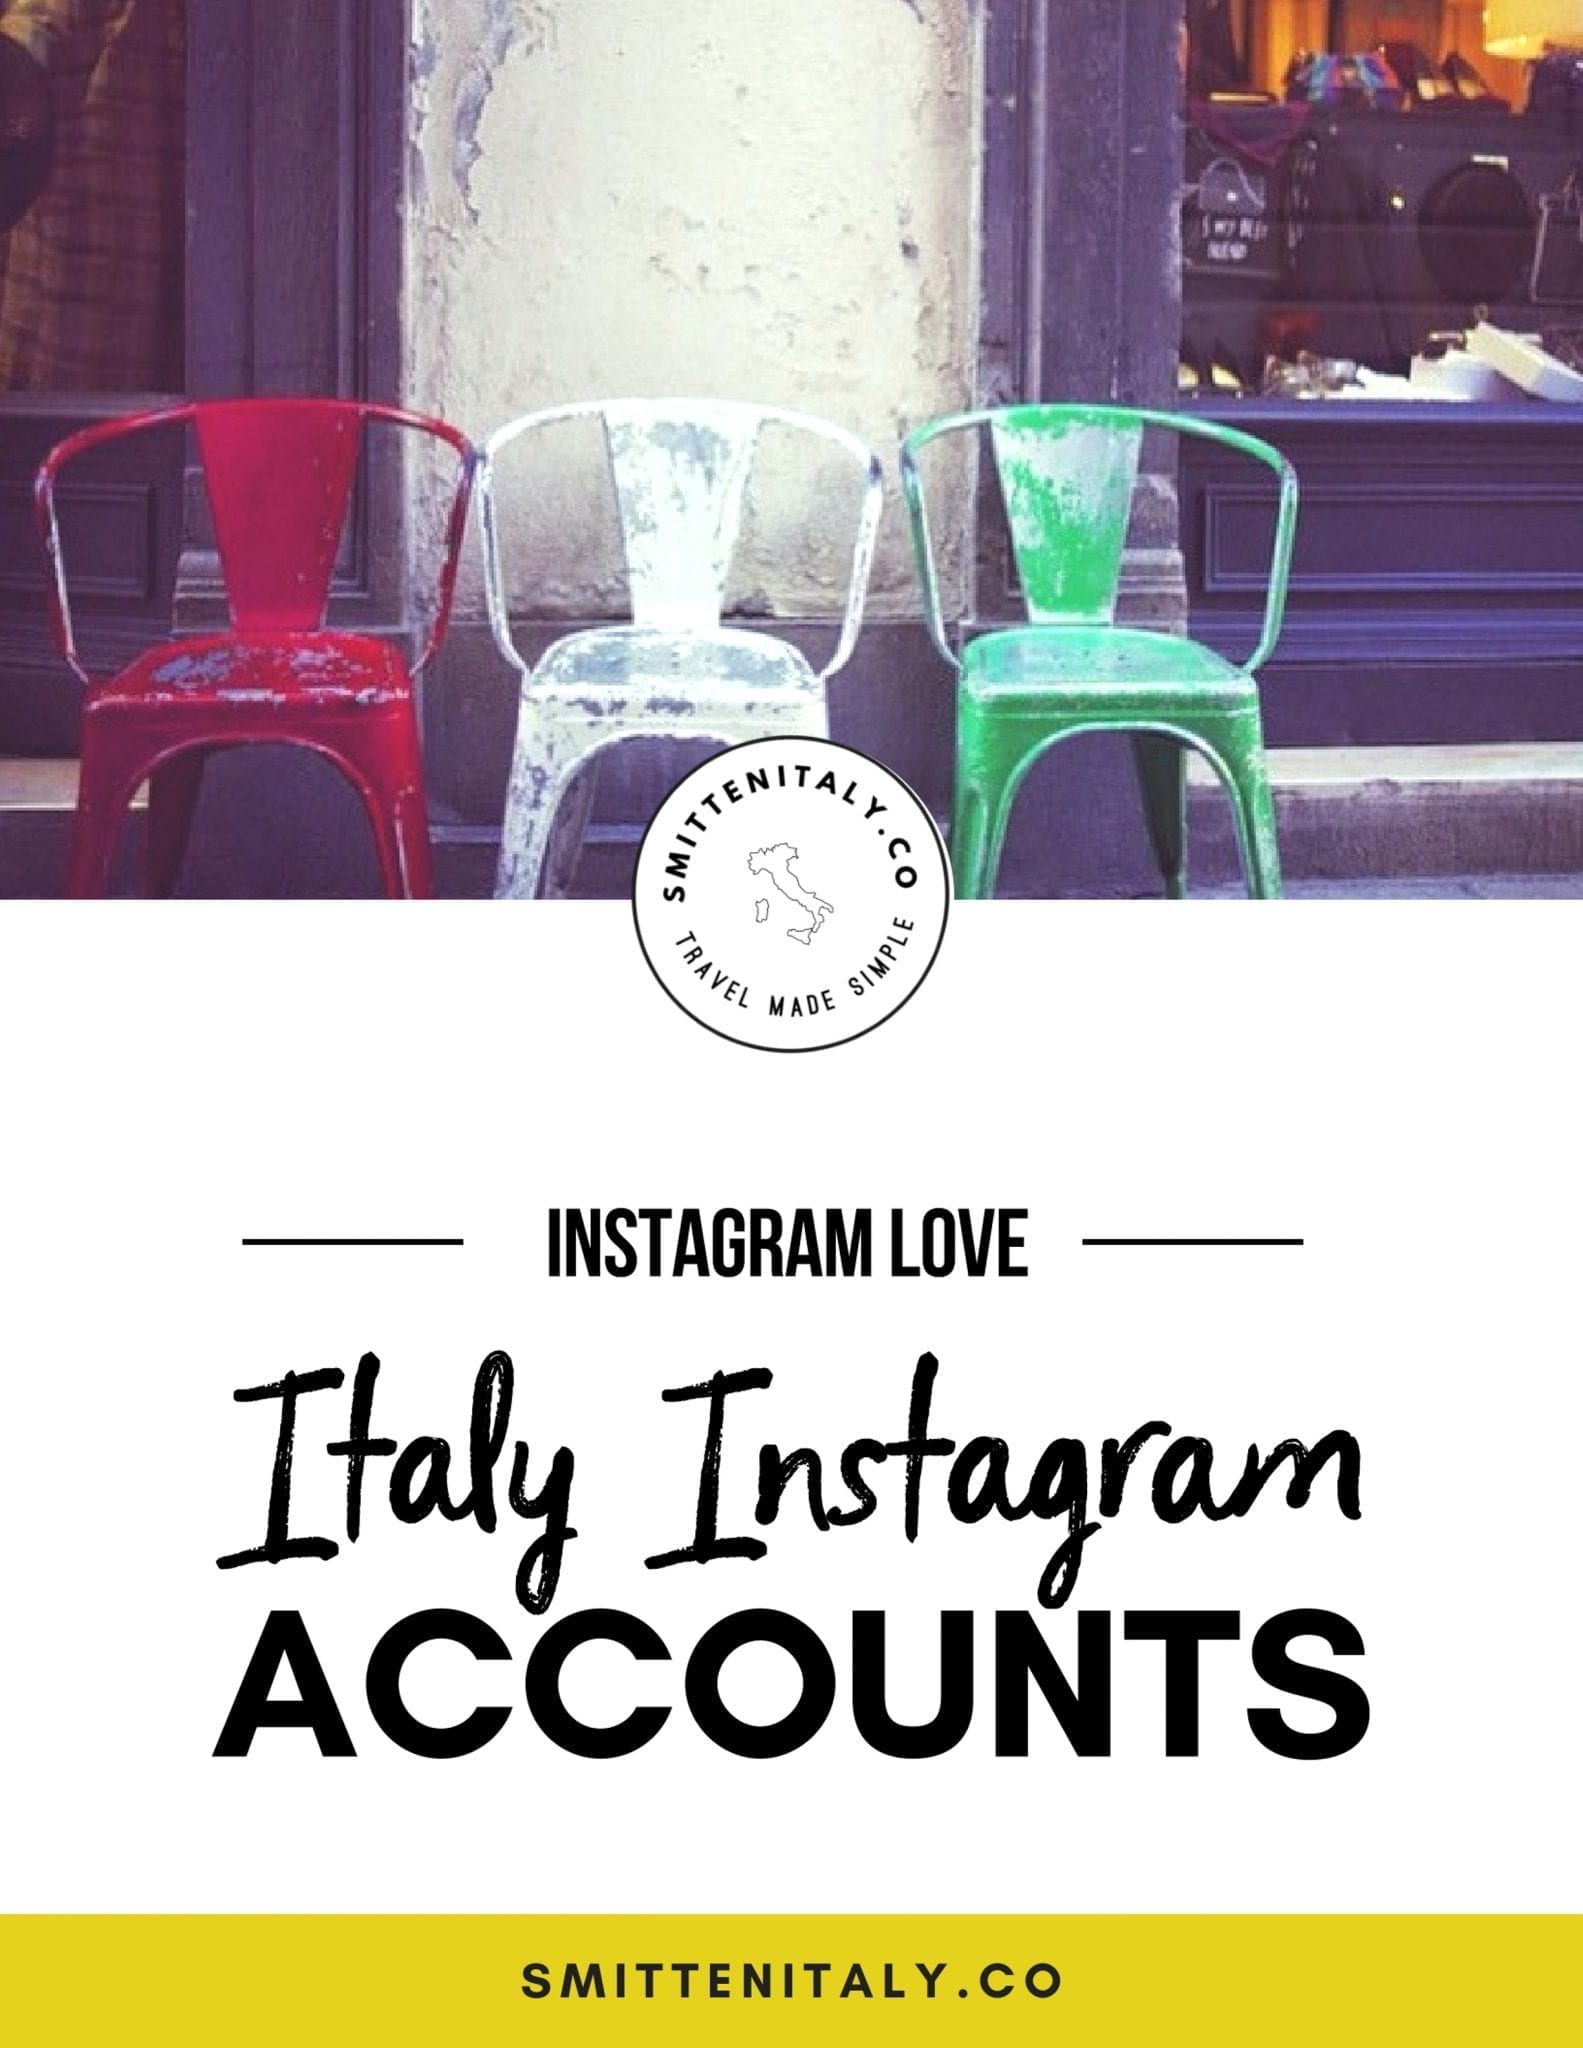 10 Favorite Italy Instagram Accounts to follow